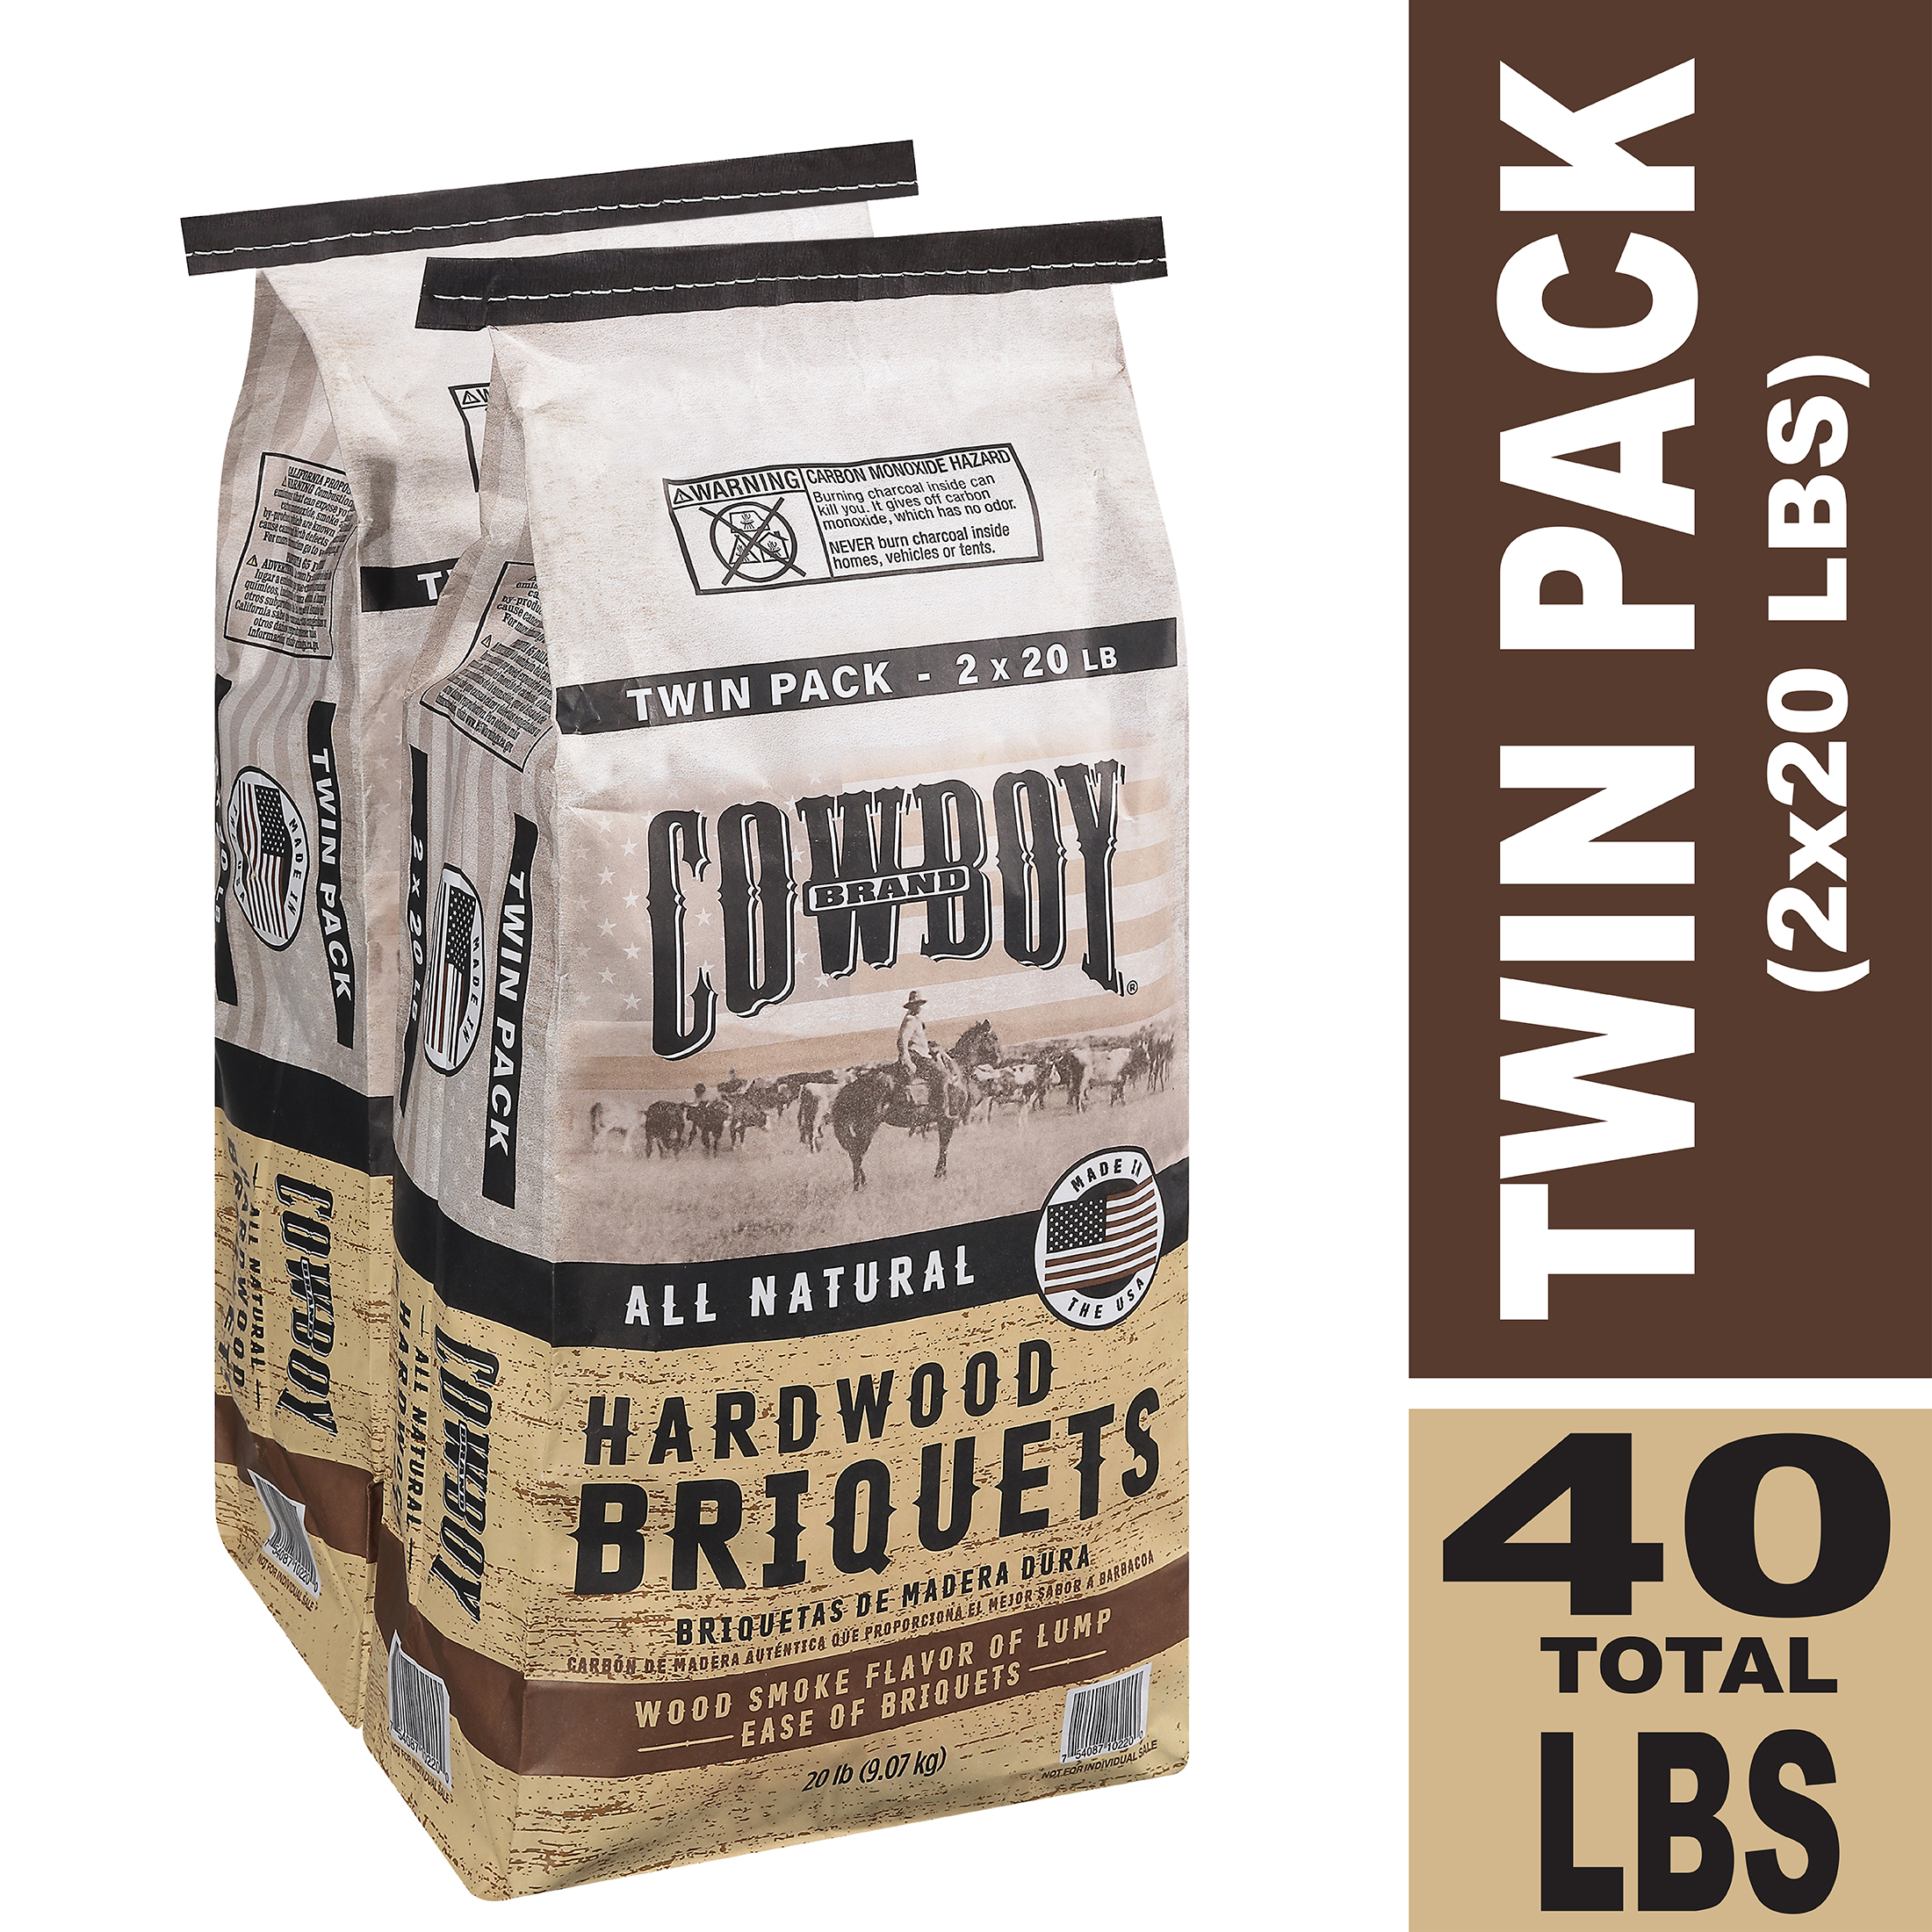 Cowboy Hardwood Charcoal Briquets, 20 Pounds Each (Pack of 2, 40 Pound Total) - image 1 of 11